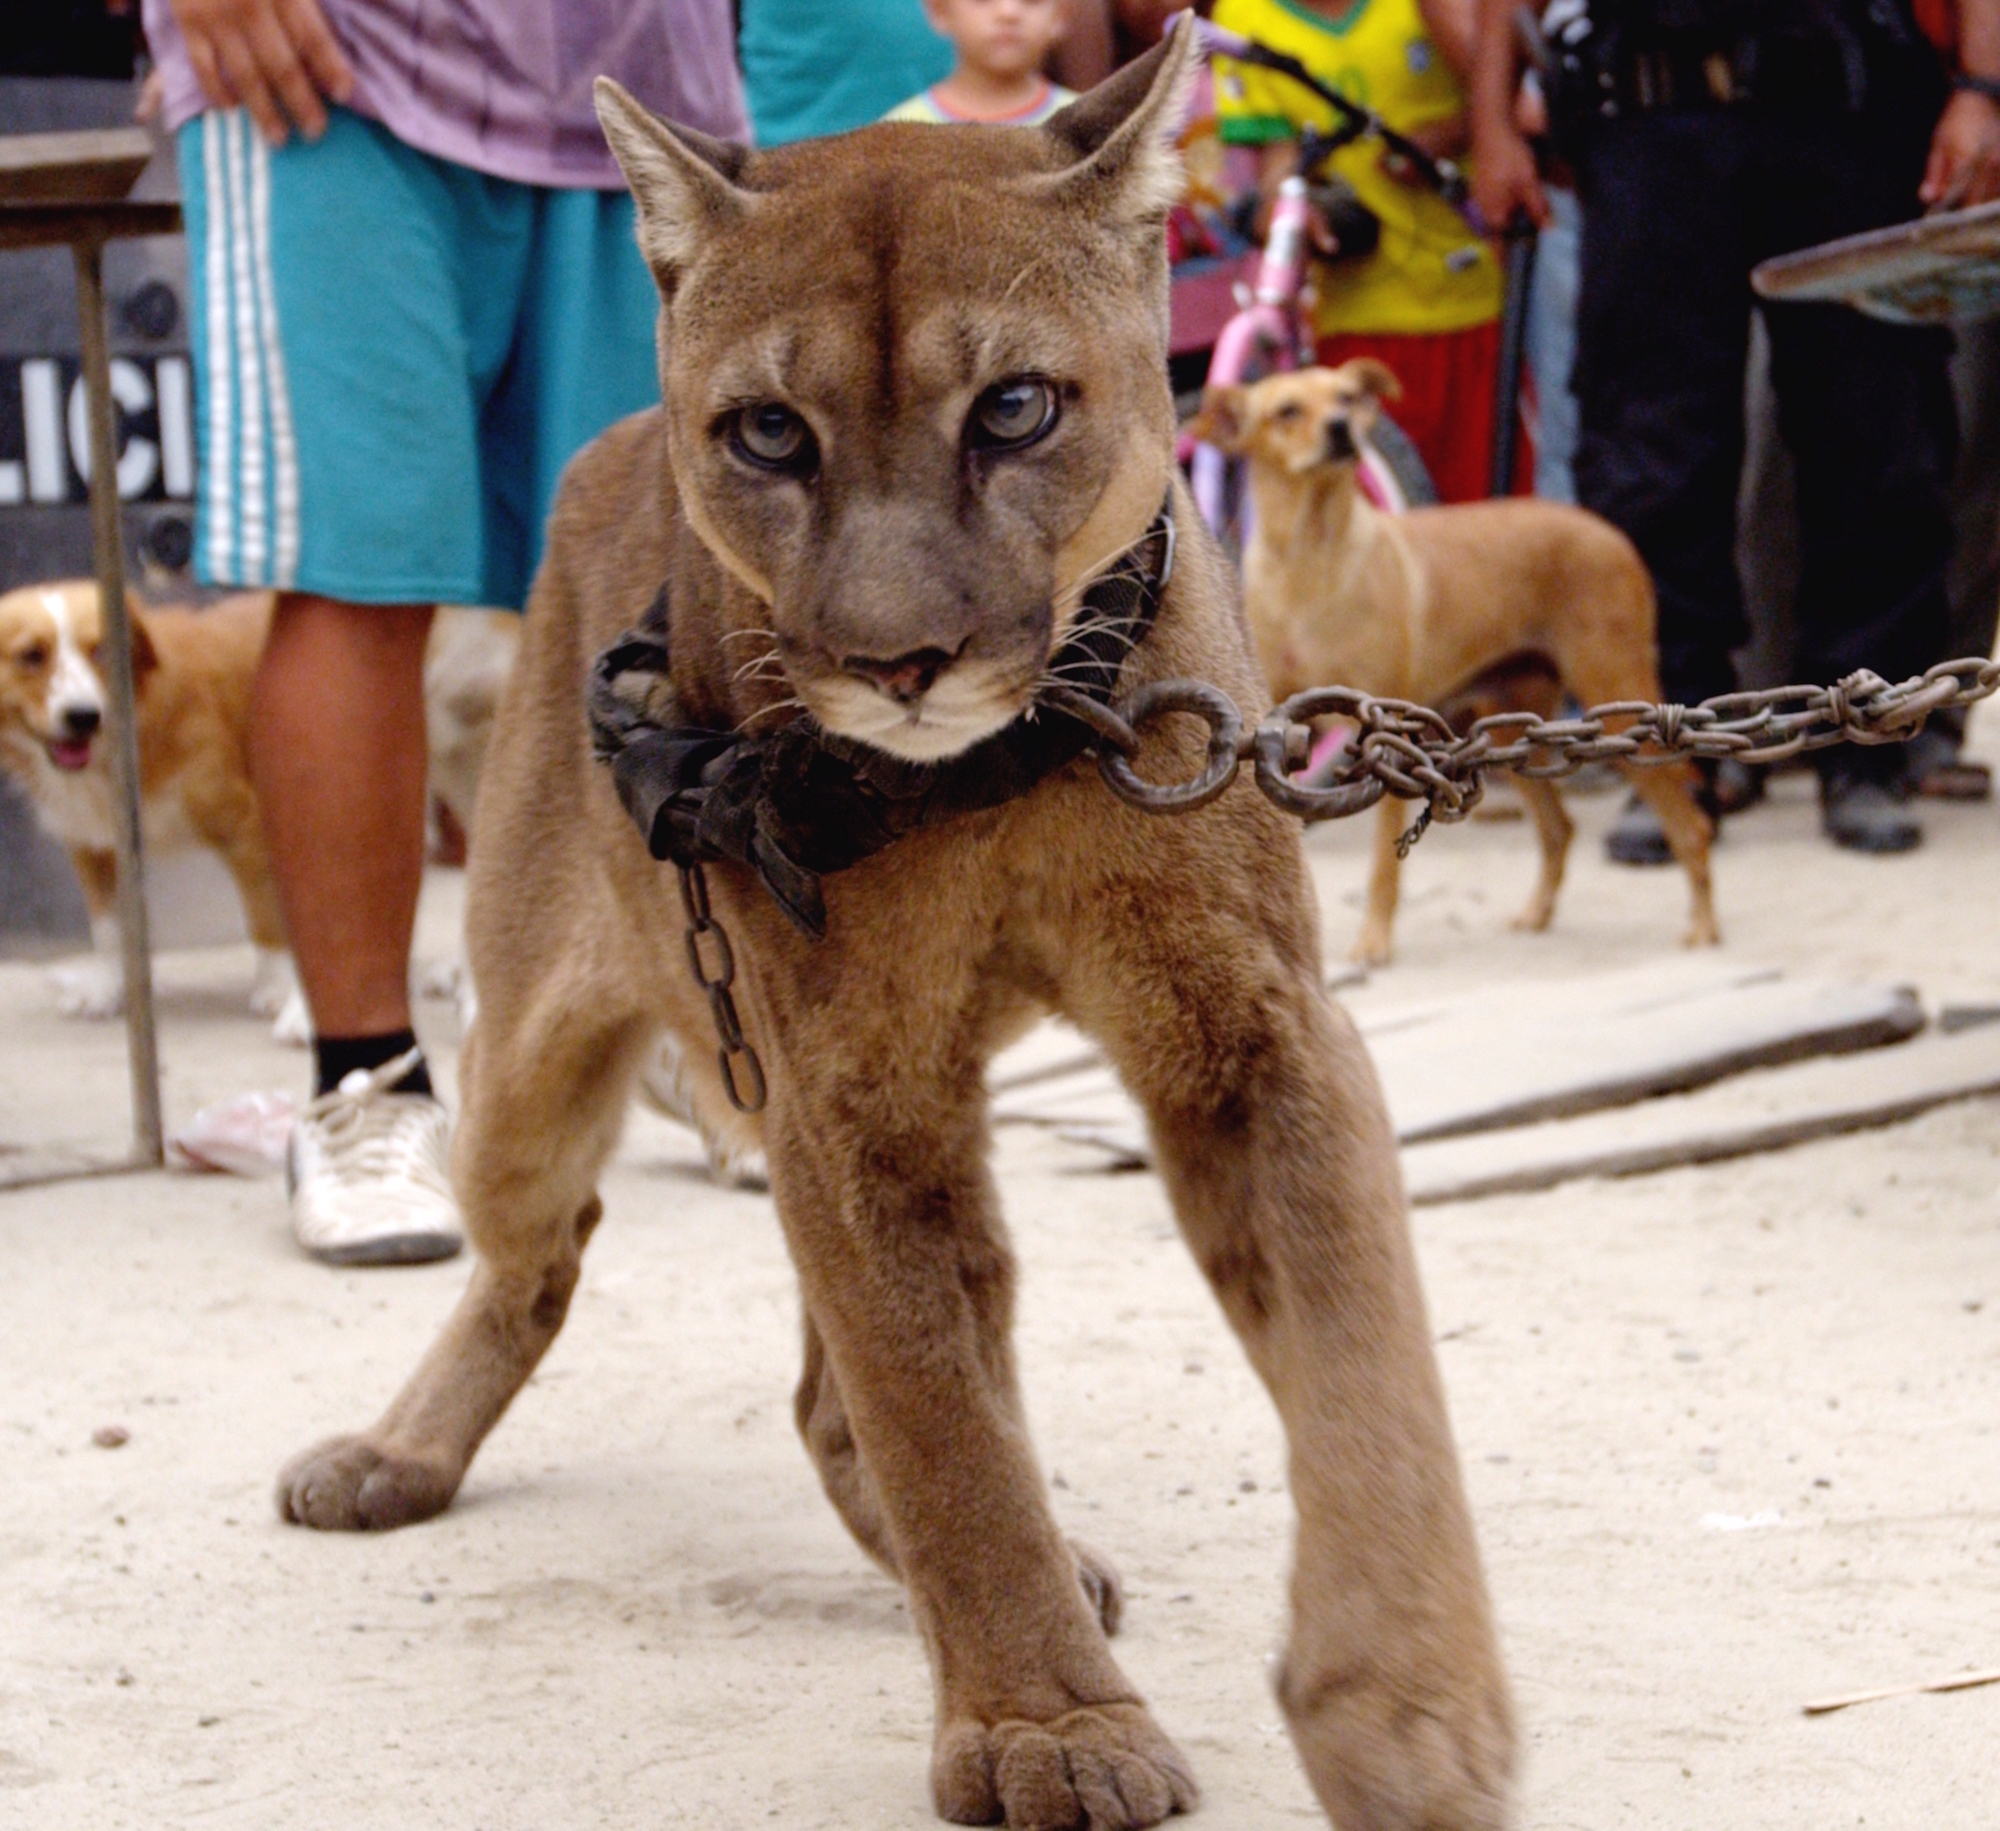 Mustafa in chains, shortly before he was released into the care of Animal Defenders International.